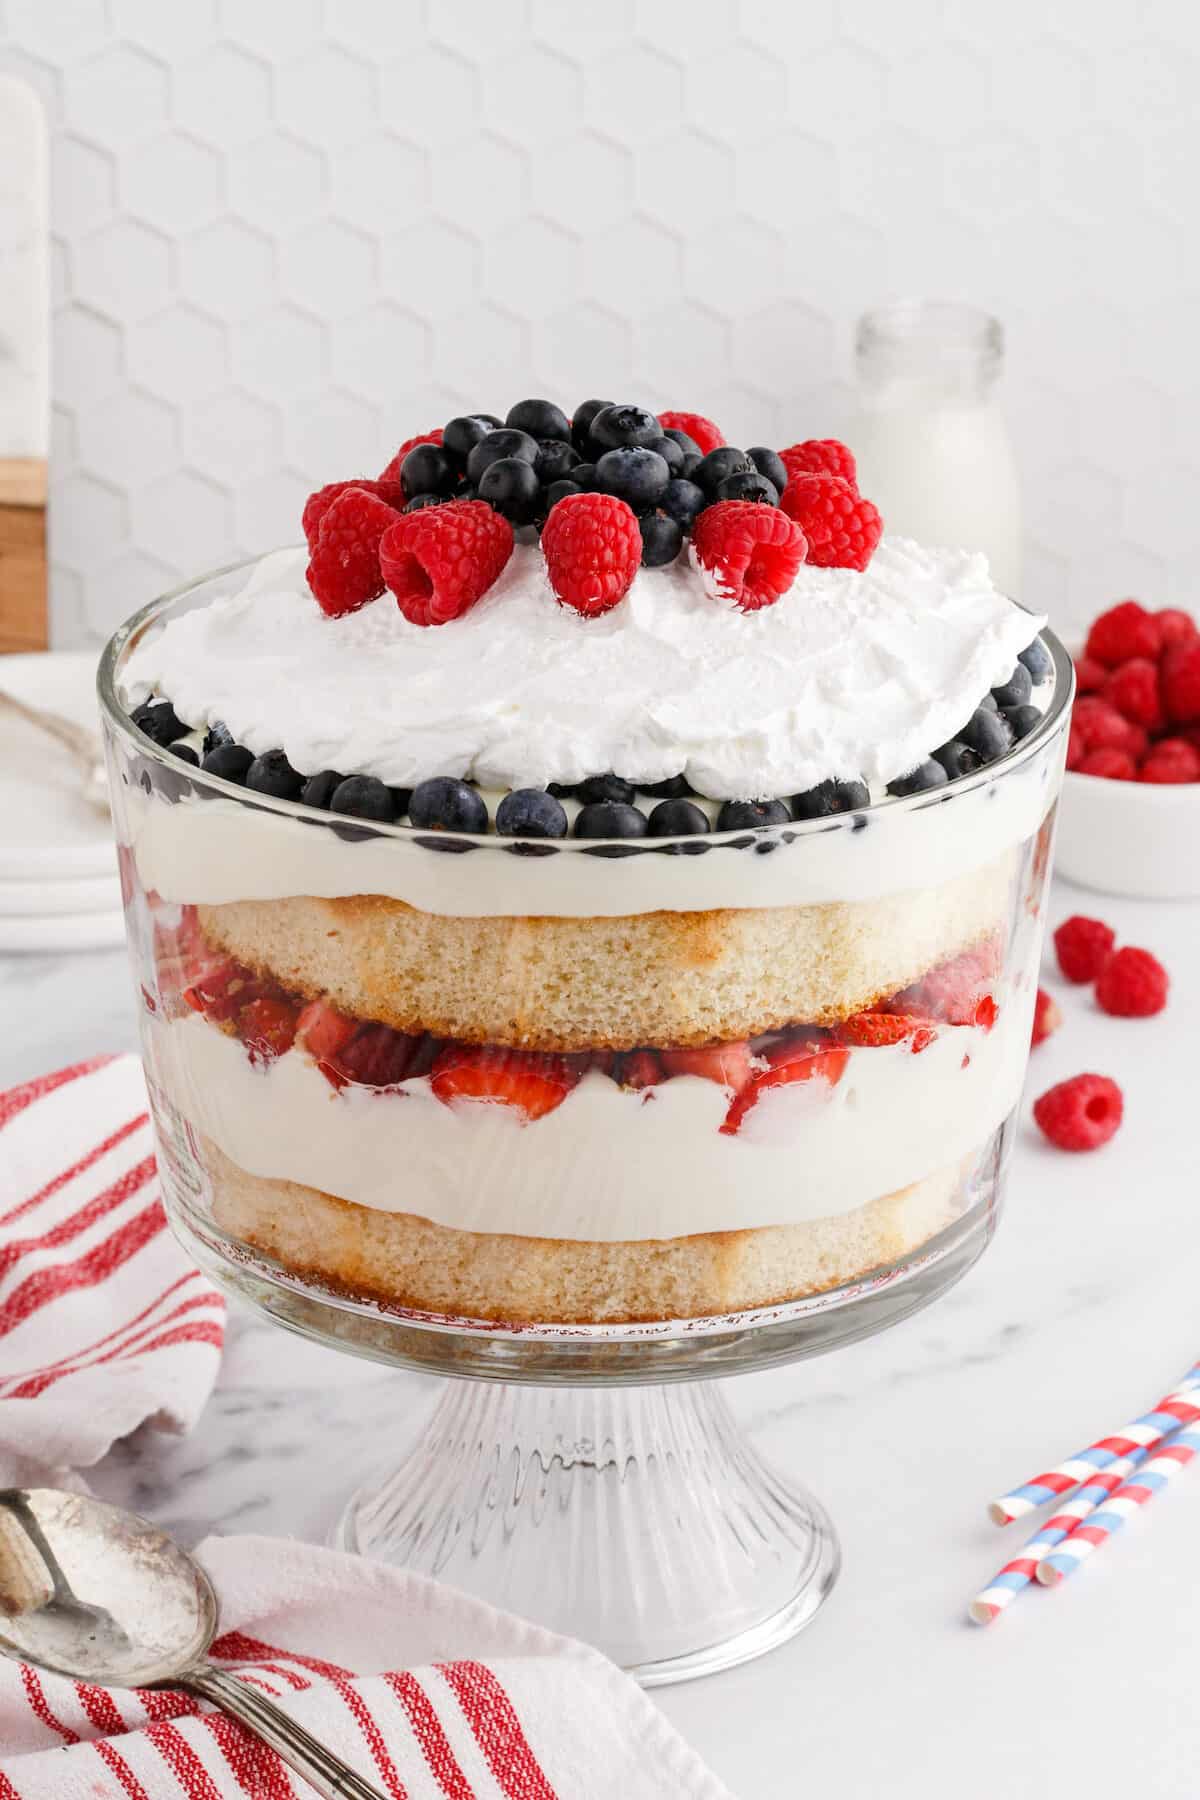 summer berries layered with pudding and whipped cream between layers of cake